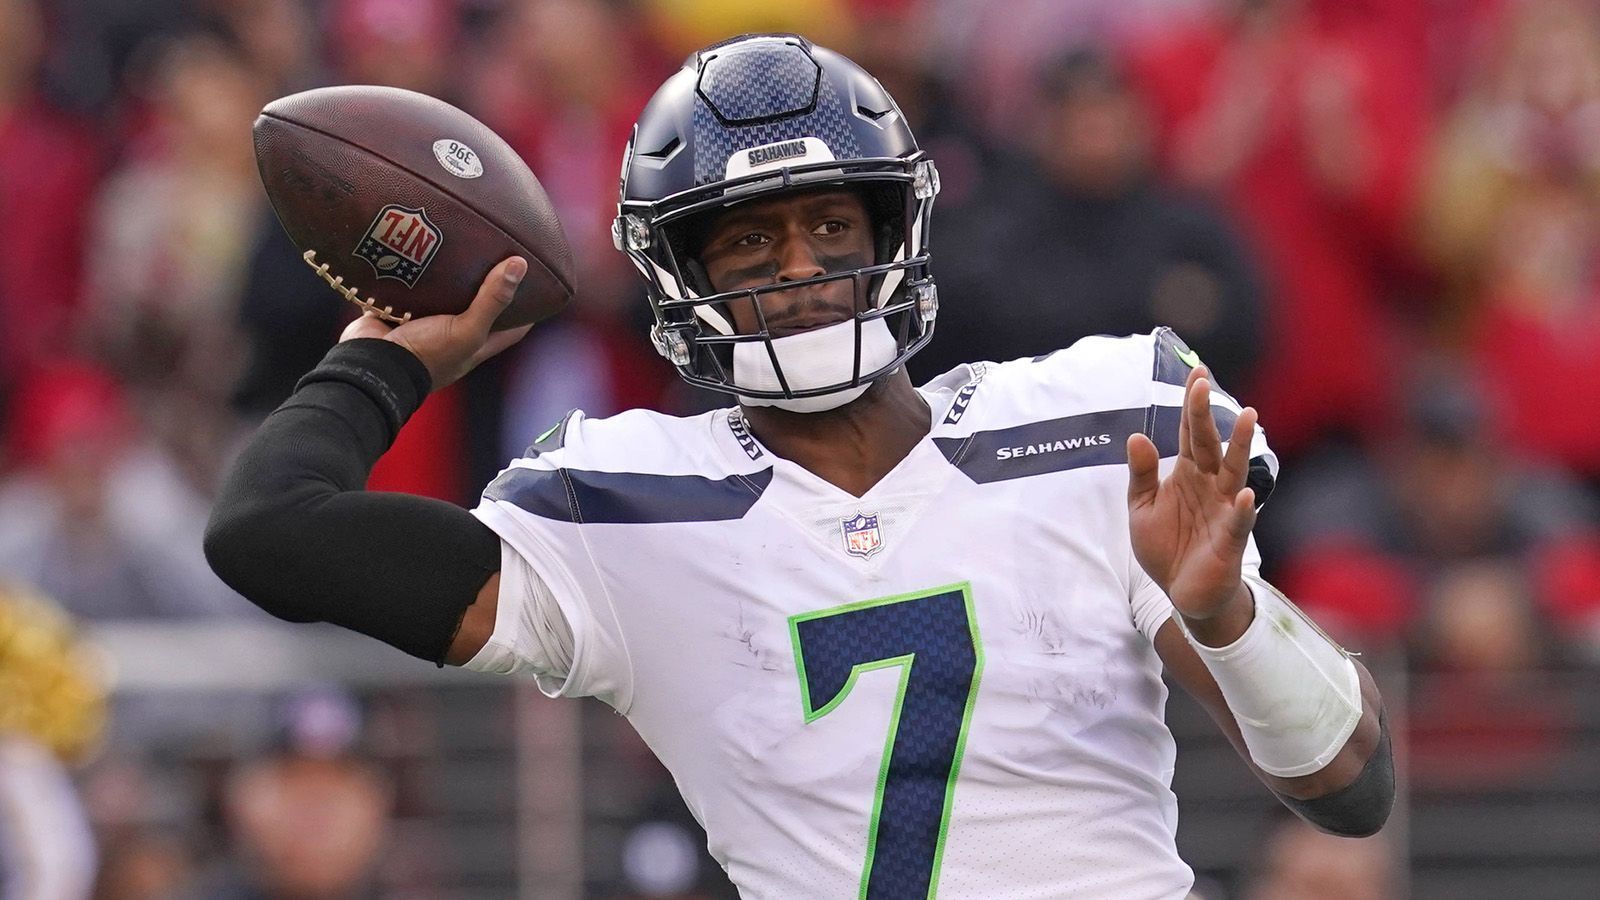 
                <strong>Geno Smith (Seattle Seahawks)</strong><br>
                &#x2022; <strong>West Virginia University</strong>: Multidisziplinäre Studiengänge (Bachelor)<br>
              